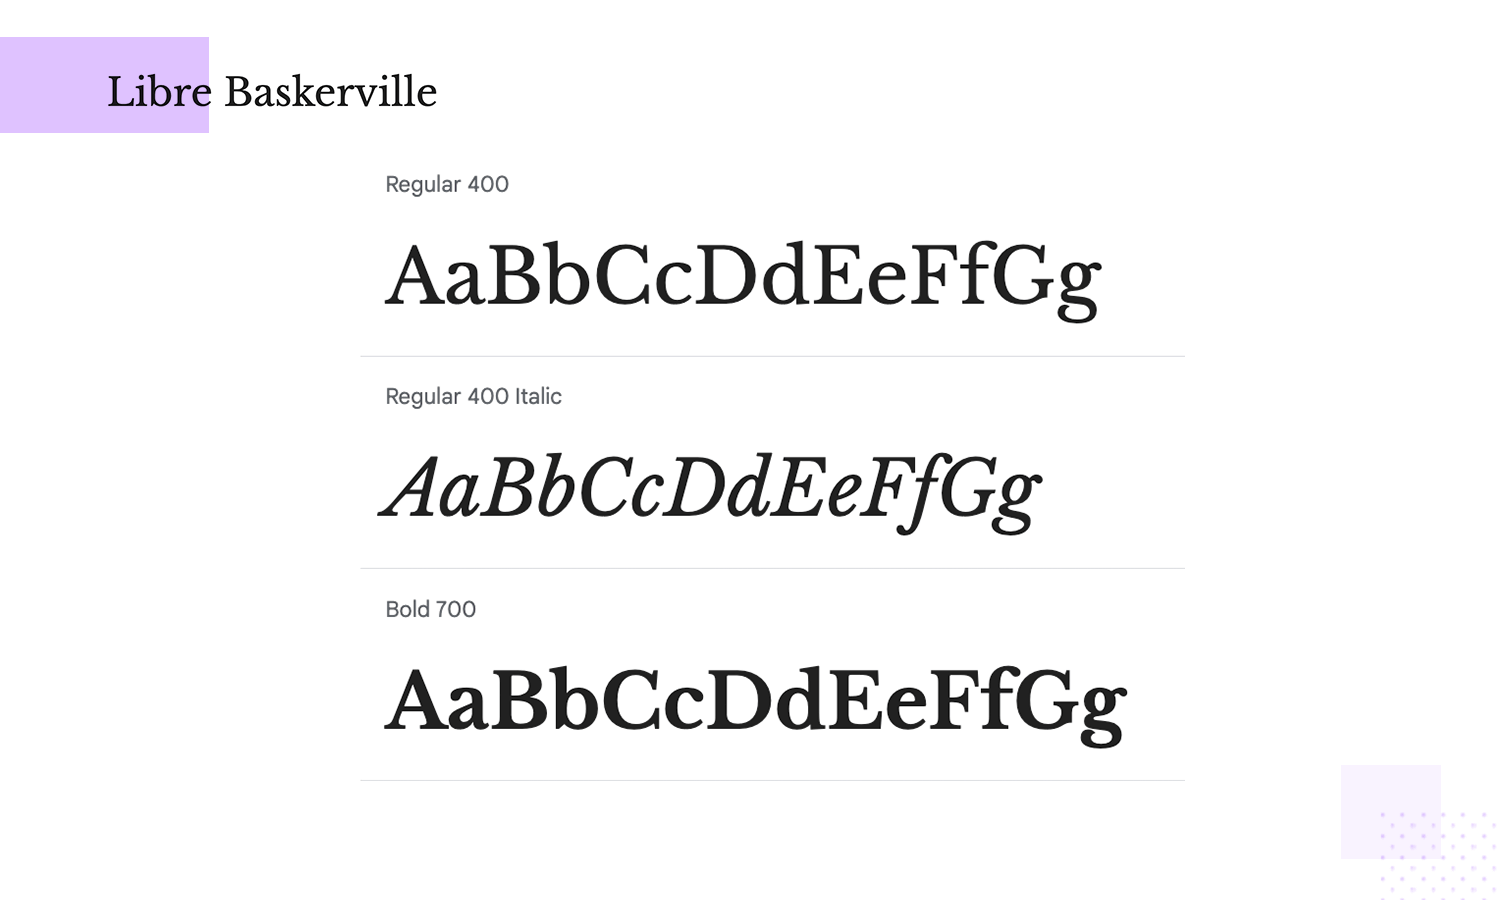 Libre Baskerville font showcase with Regular and Bold weights, including italics